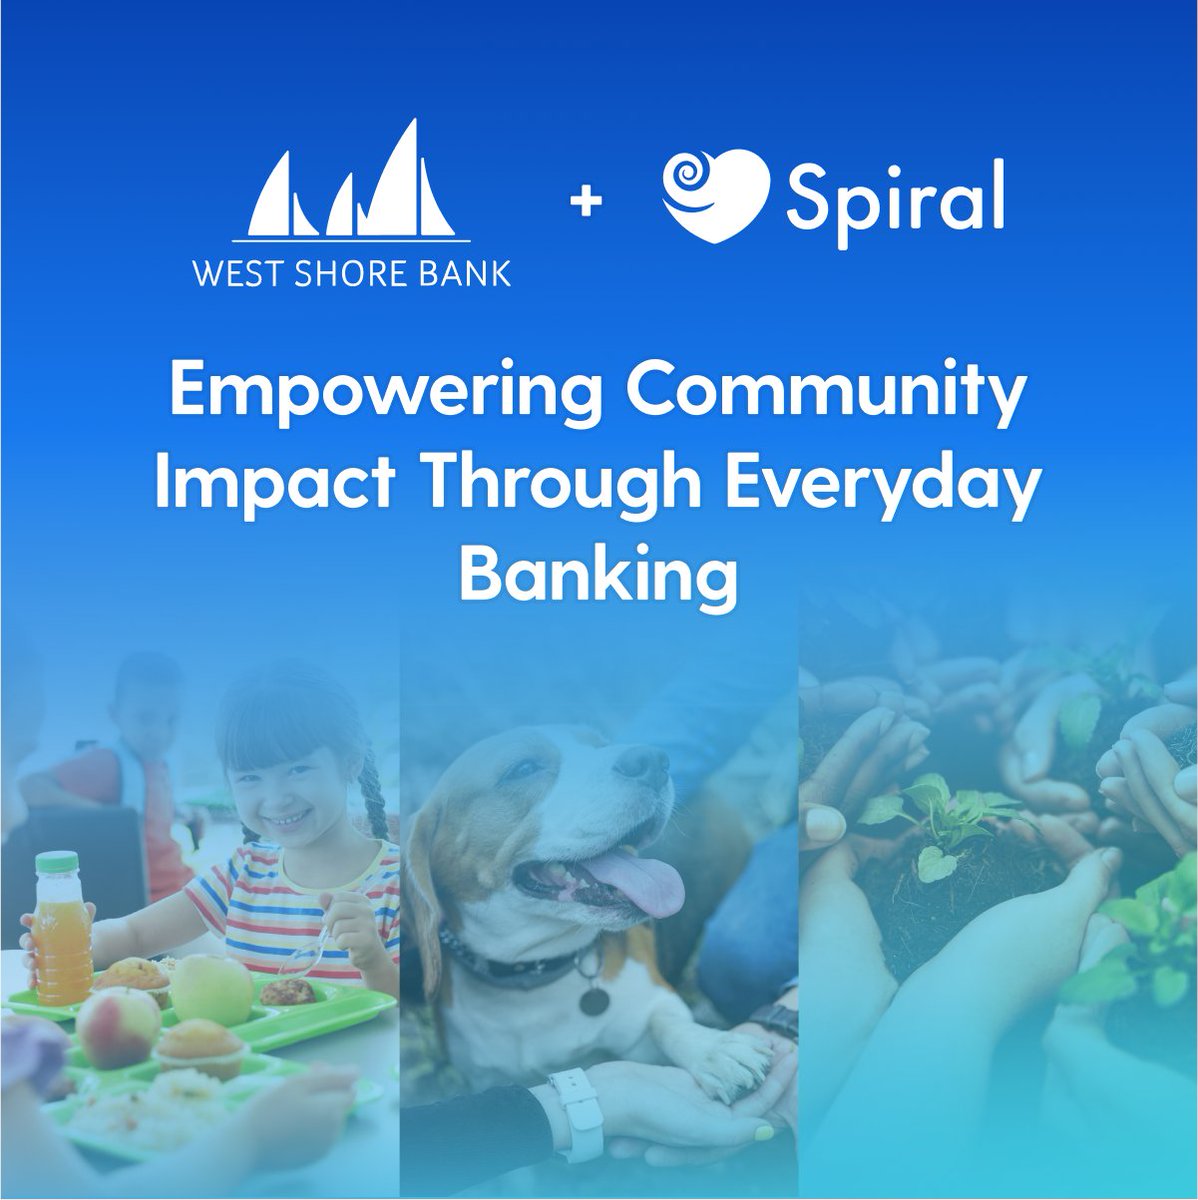 📣 We're thrilled to share that West Shore Bank has selected Spiral's platform to empower its consumers and businesses to do good through everyday banking! 🌎 Read more 👉️ bit.ly/West-Shore-Bank #fintech #digitalbanking #communityimpact #everydayimpact